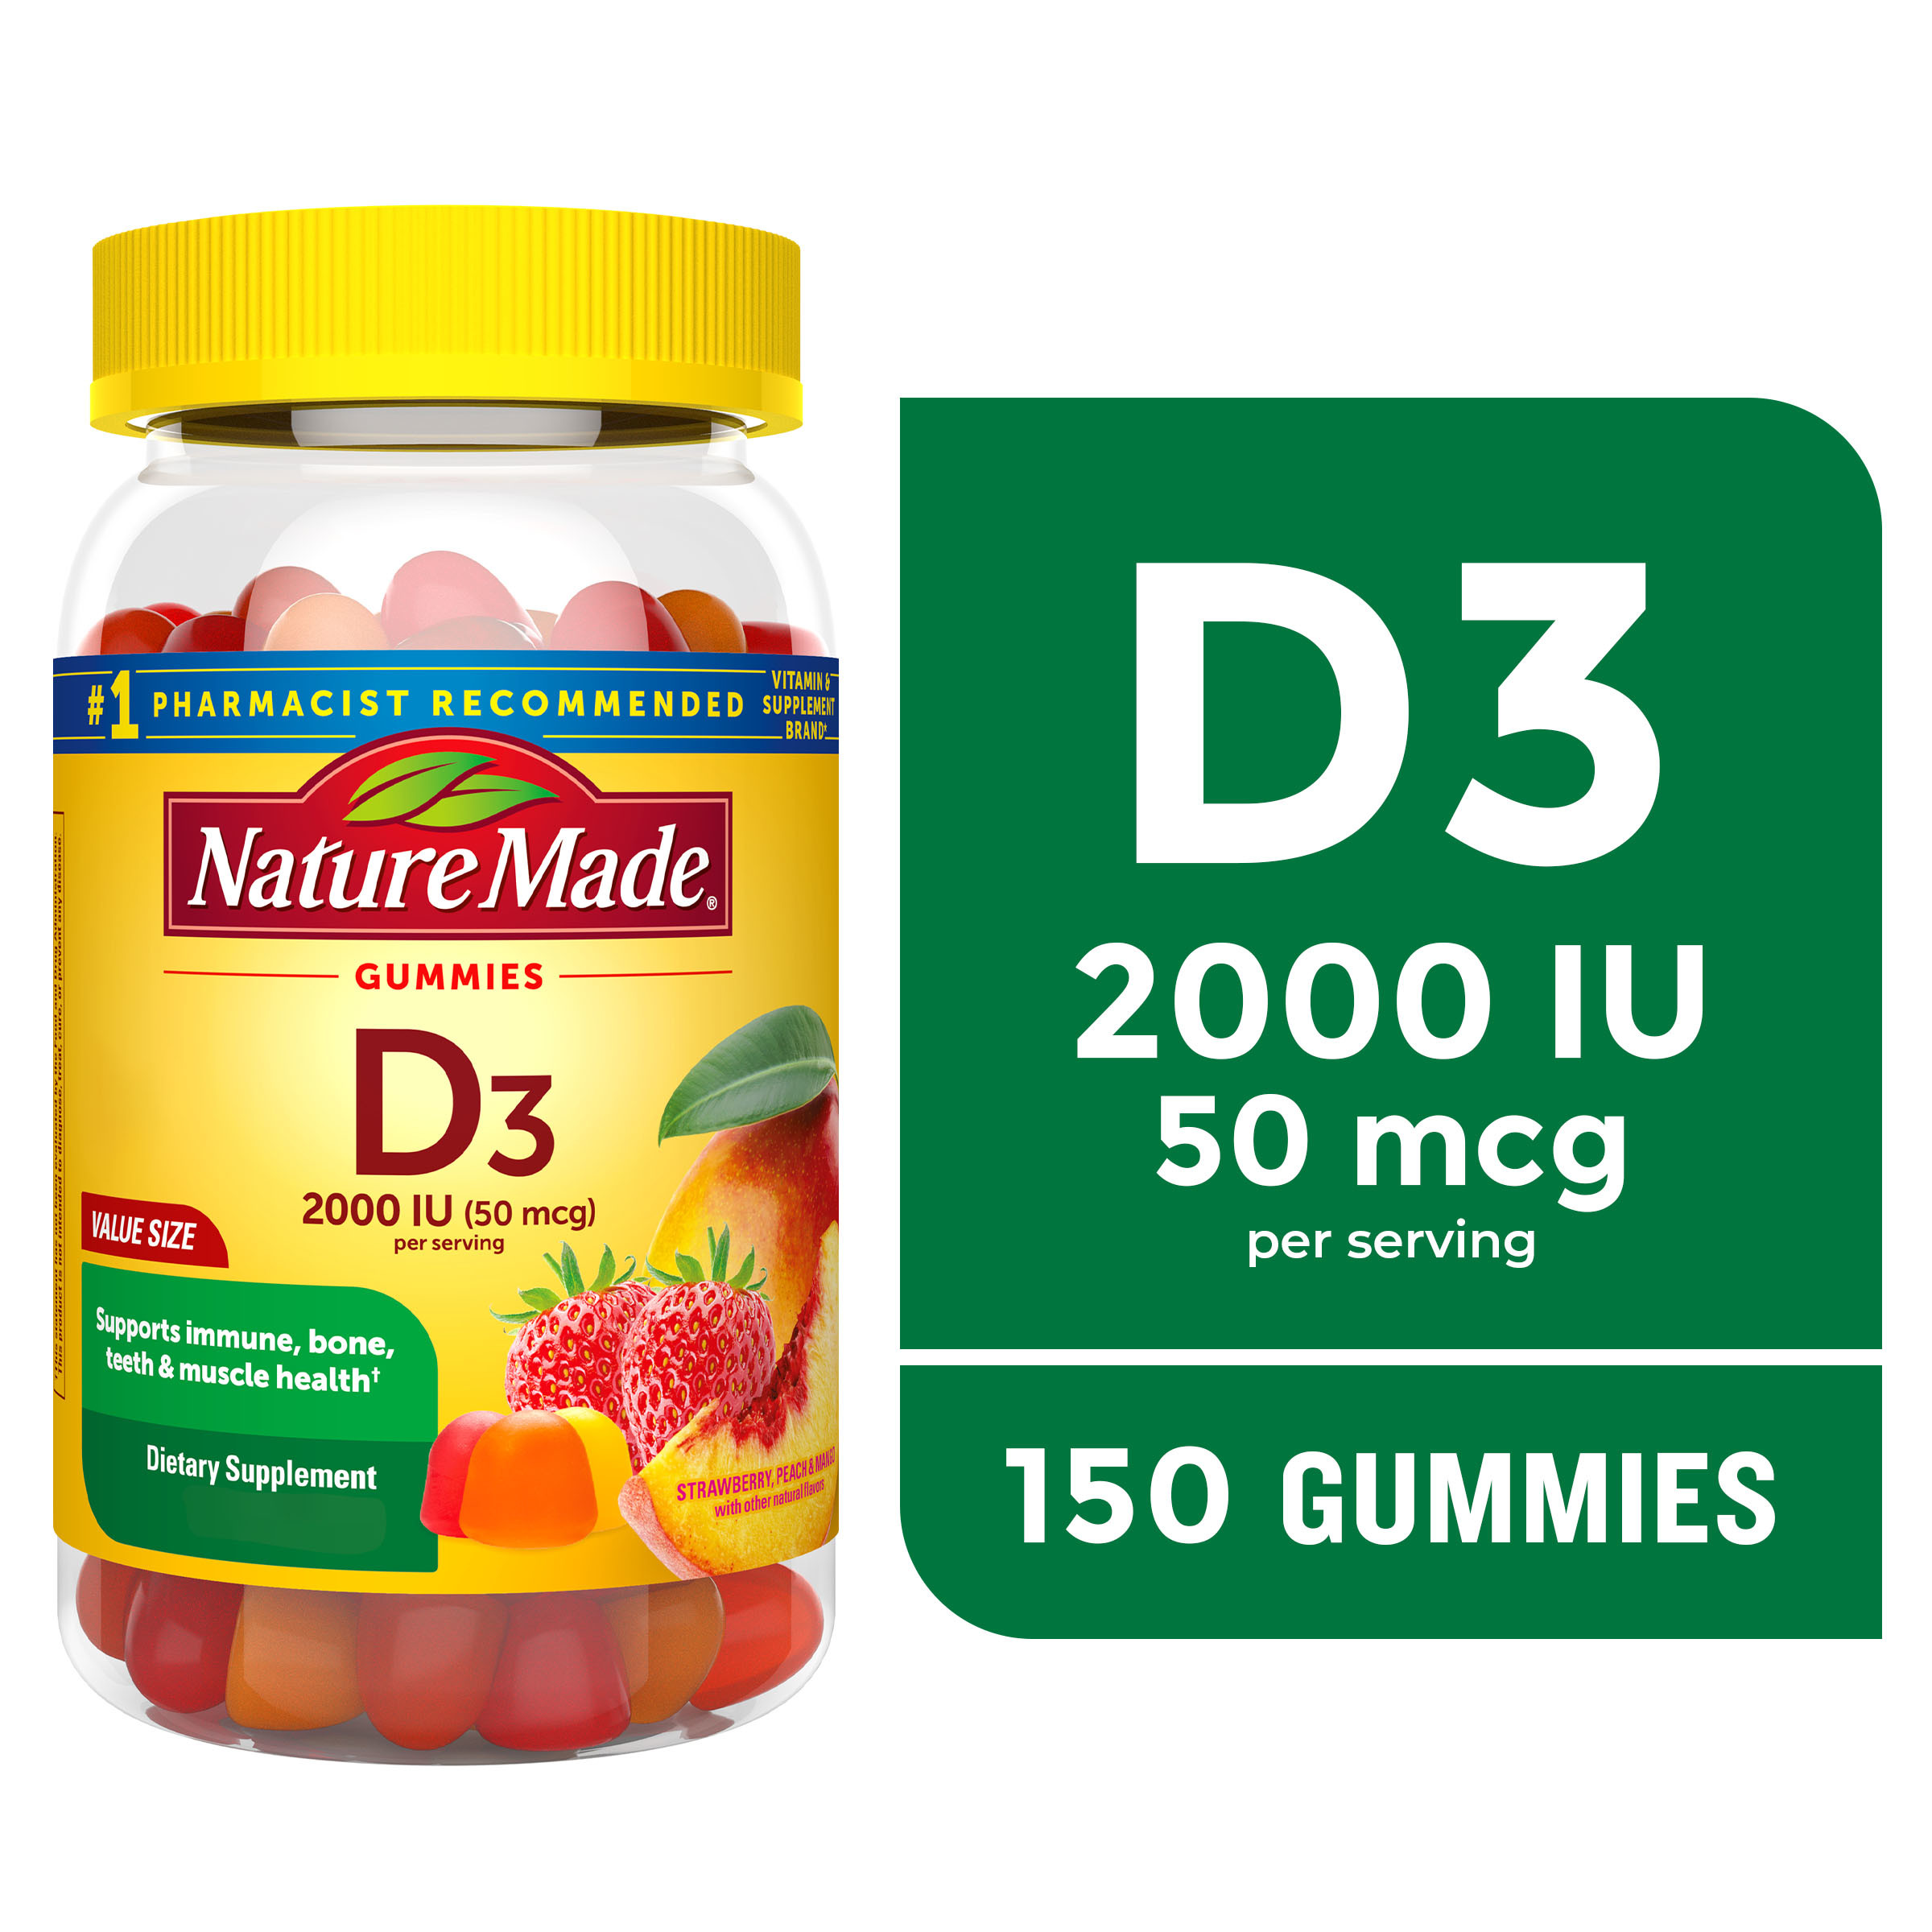 Nature Made Vitamin D3 2000 IU (50 mcg) Per Serving Gummies, Dietary Supplement for Bone and Immune Health Support, 150 Count - image 1 of 15